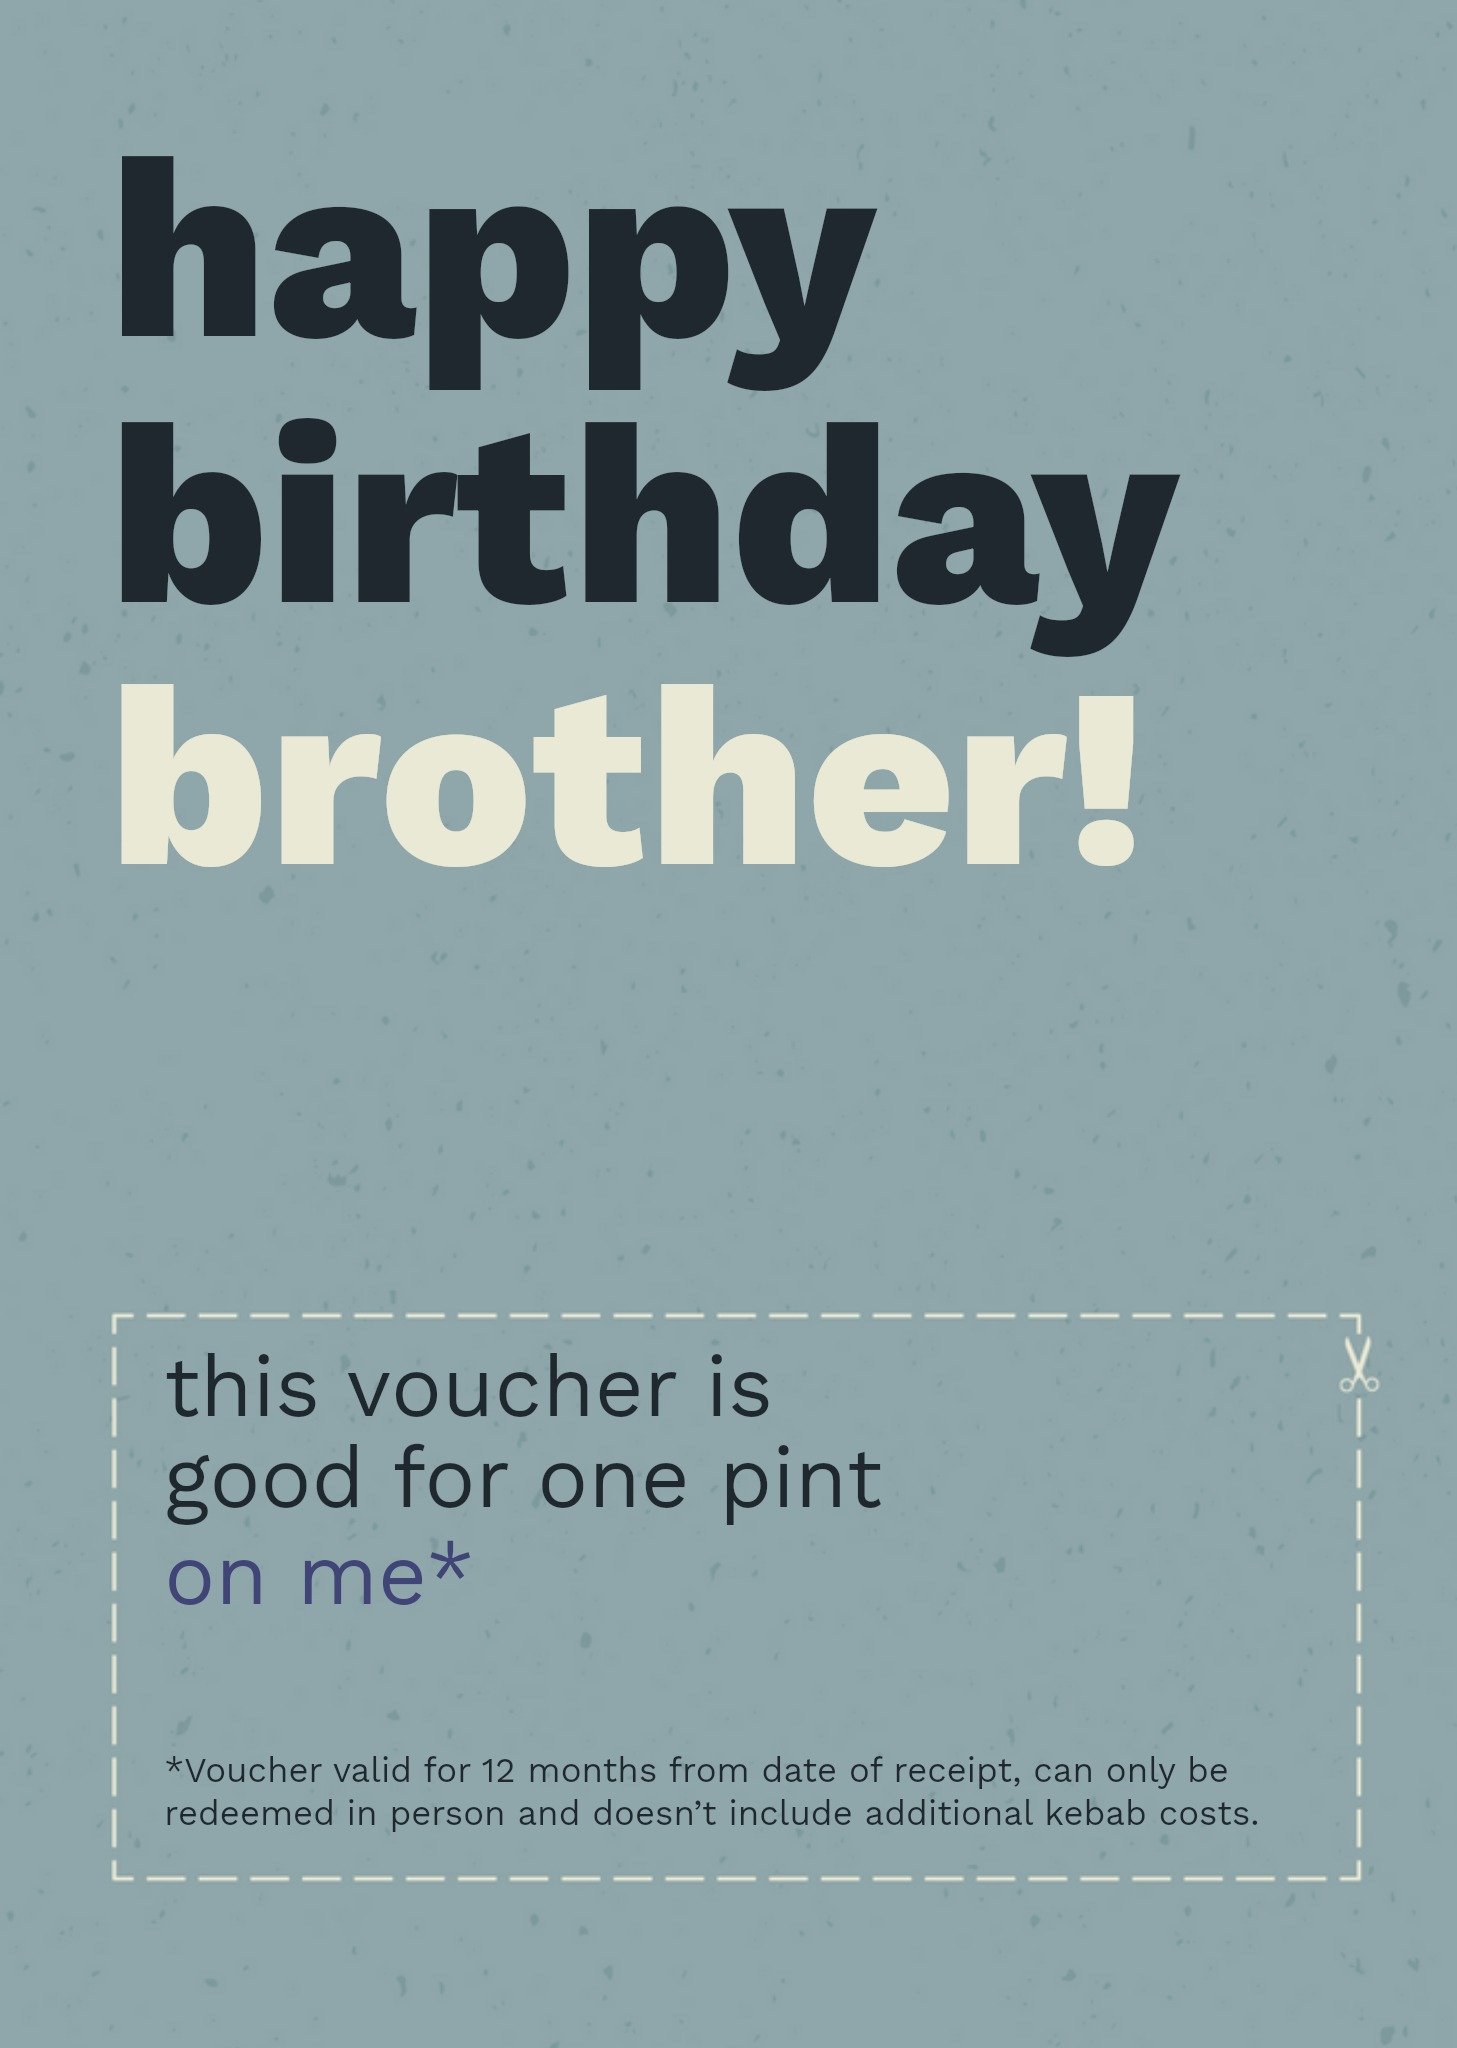 Moonpig Humorous Brother Beer Voucher Typographic Birthday Greetings Card, Large